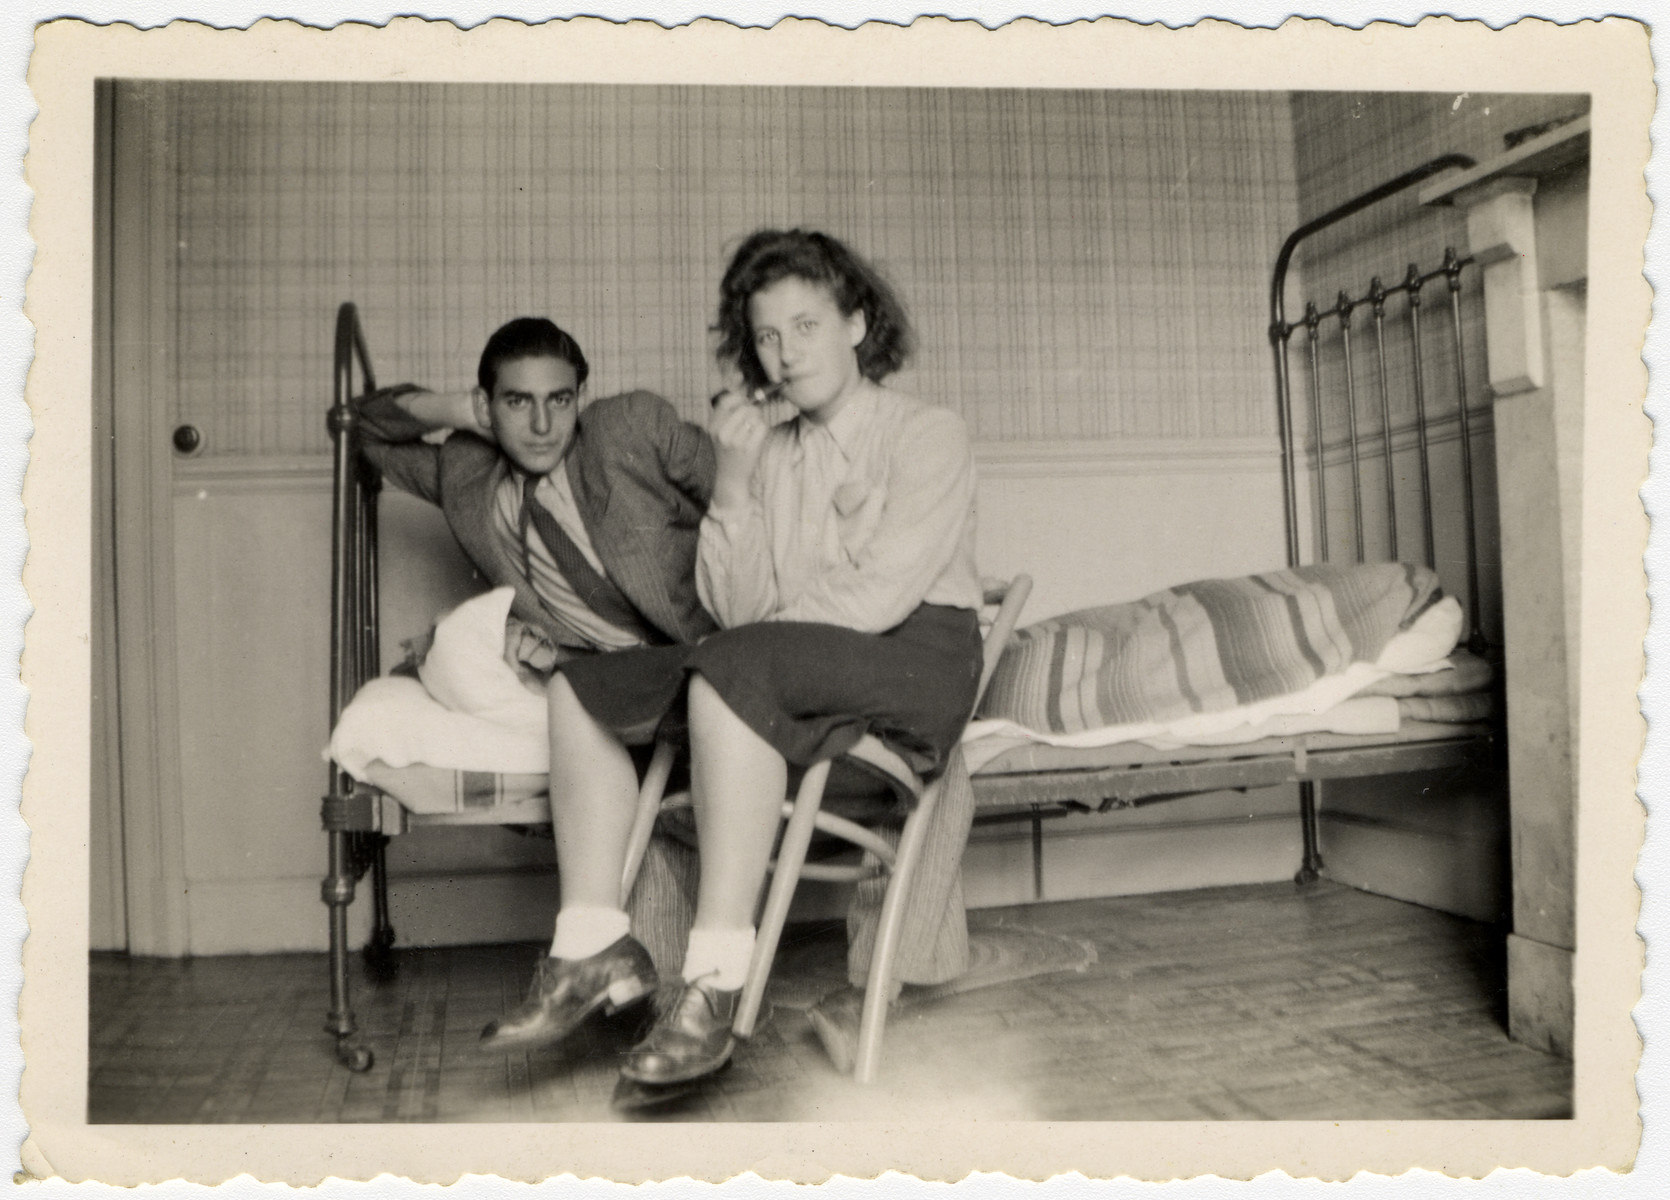 Two Jewish young people pose in a room with a bed and chair.

Pictured are Haim Vidal Sephiha and Ida (Naomi) Rosenschtraugh.  She later immigrated to Israel.